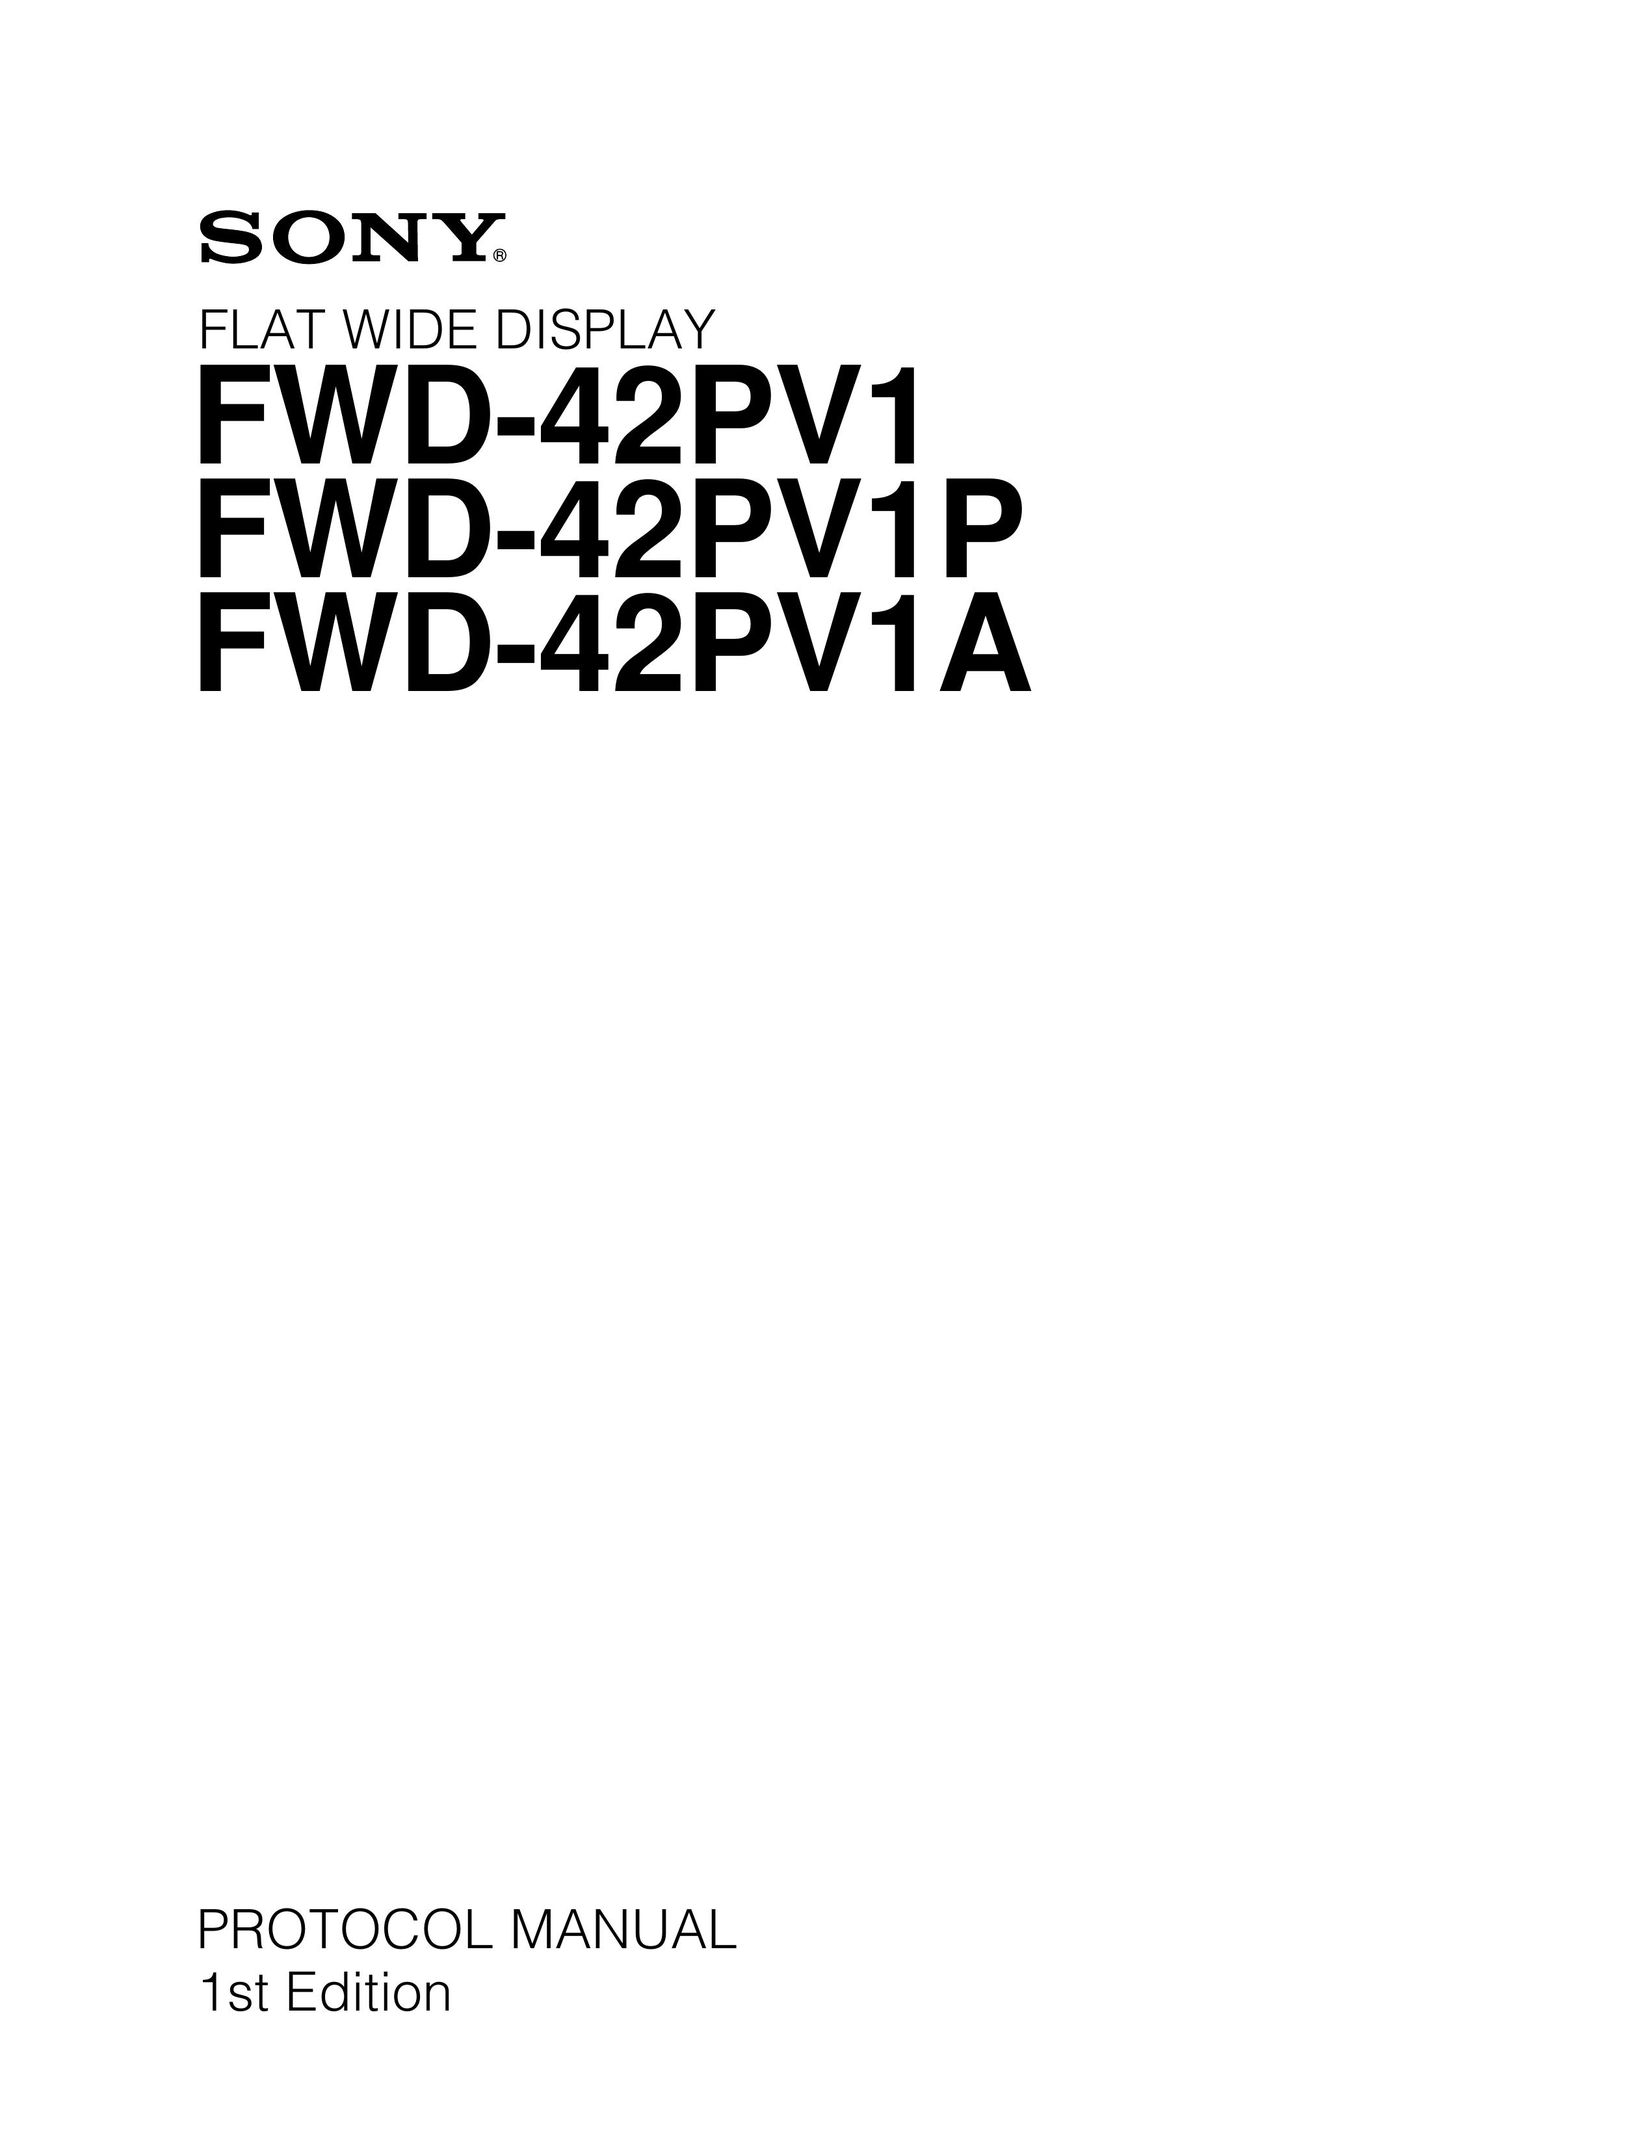 Sony FWD- 42PV1 Home Theater Screen User Manual